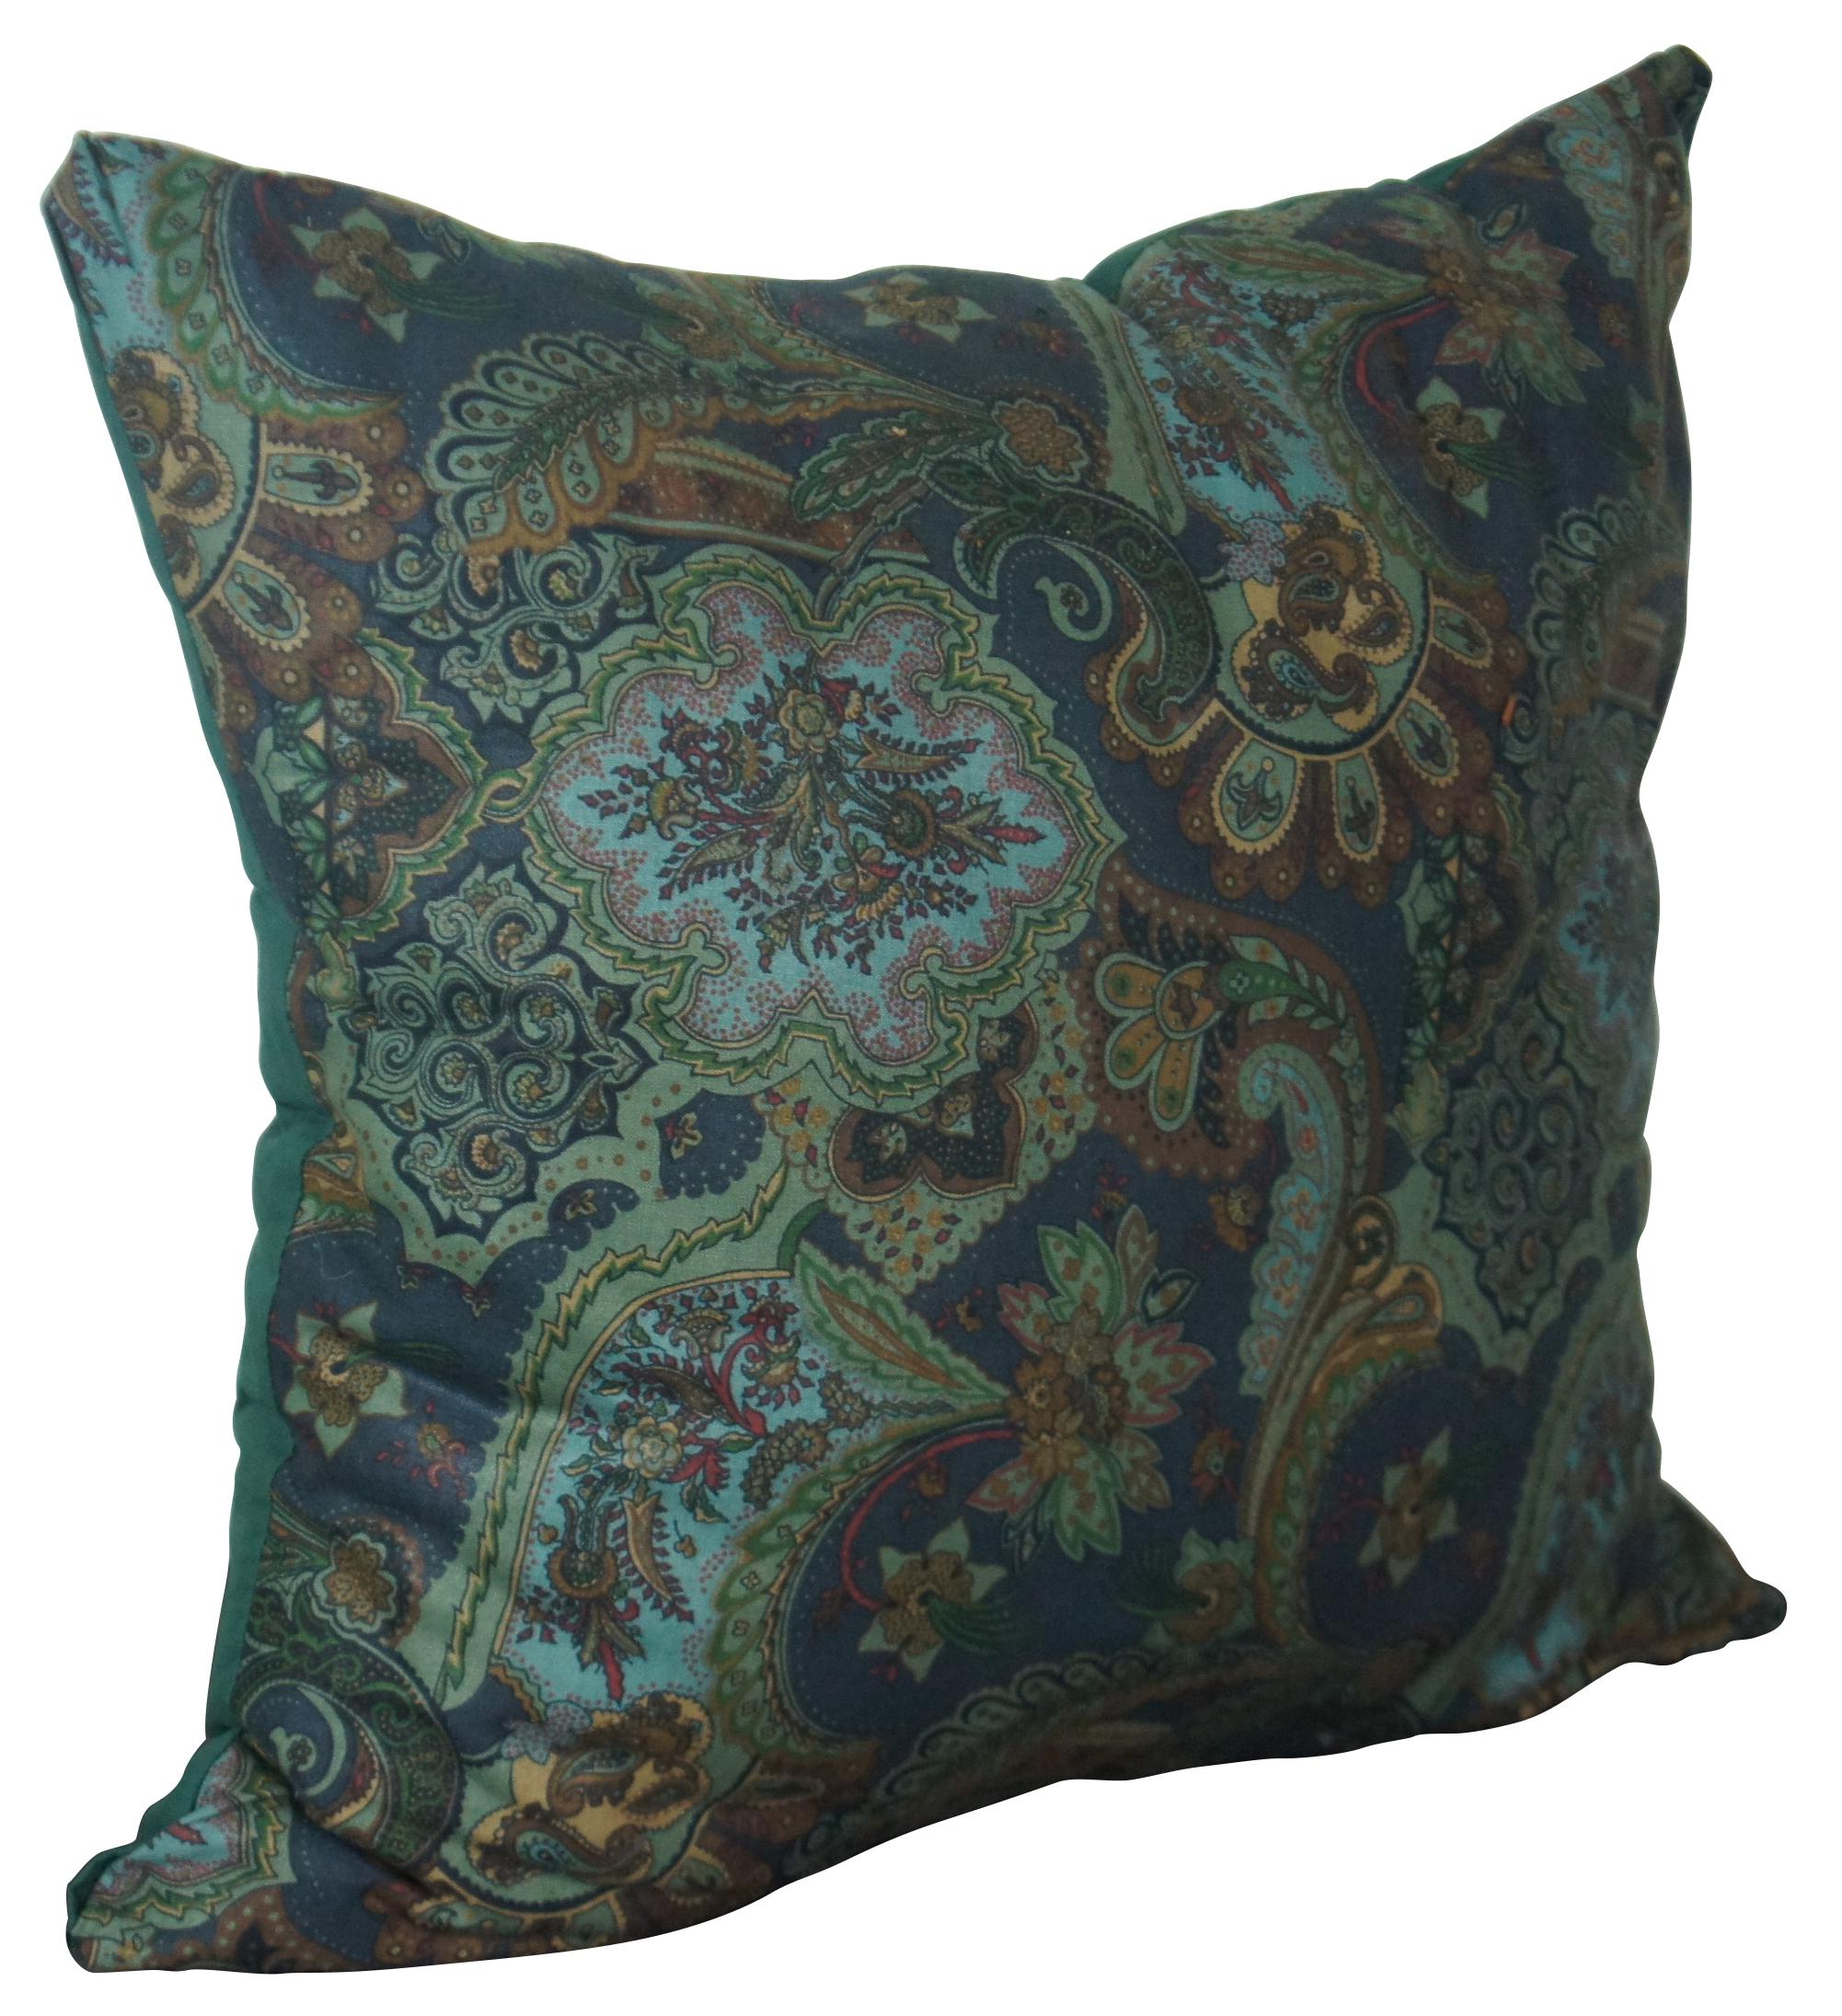 Vintage fiber filled pillow with a printed linen front in blue, green and brown paisley, and a green cotton back.